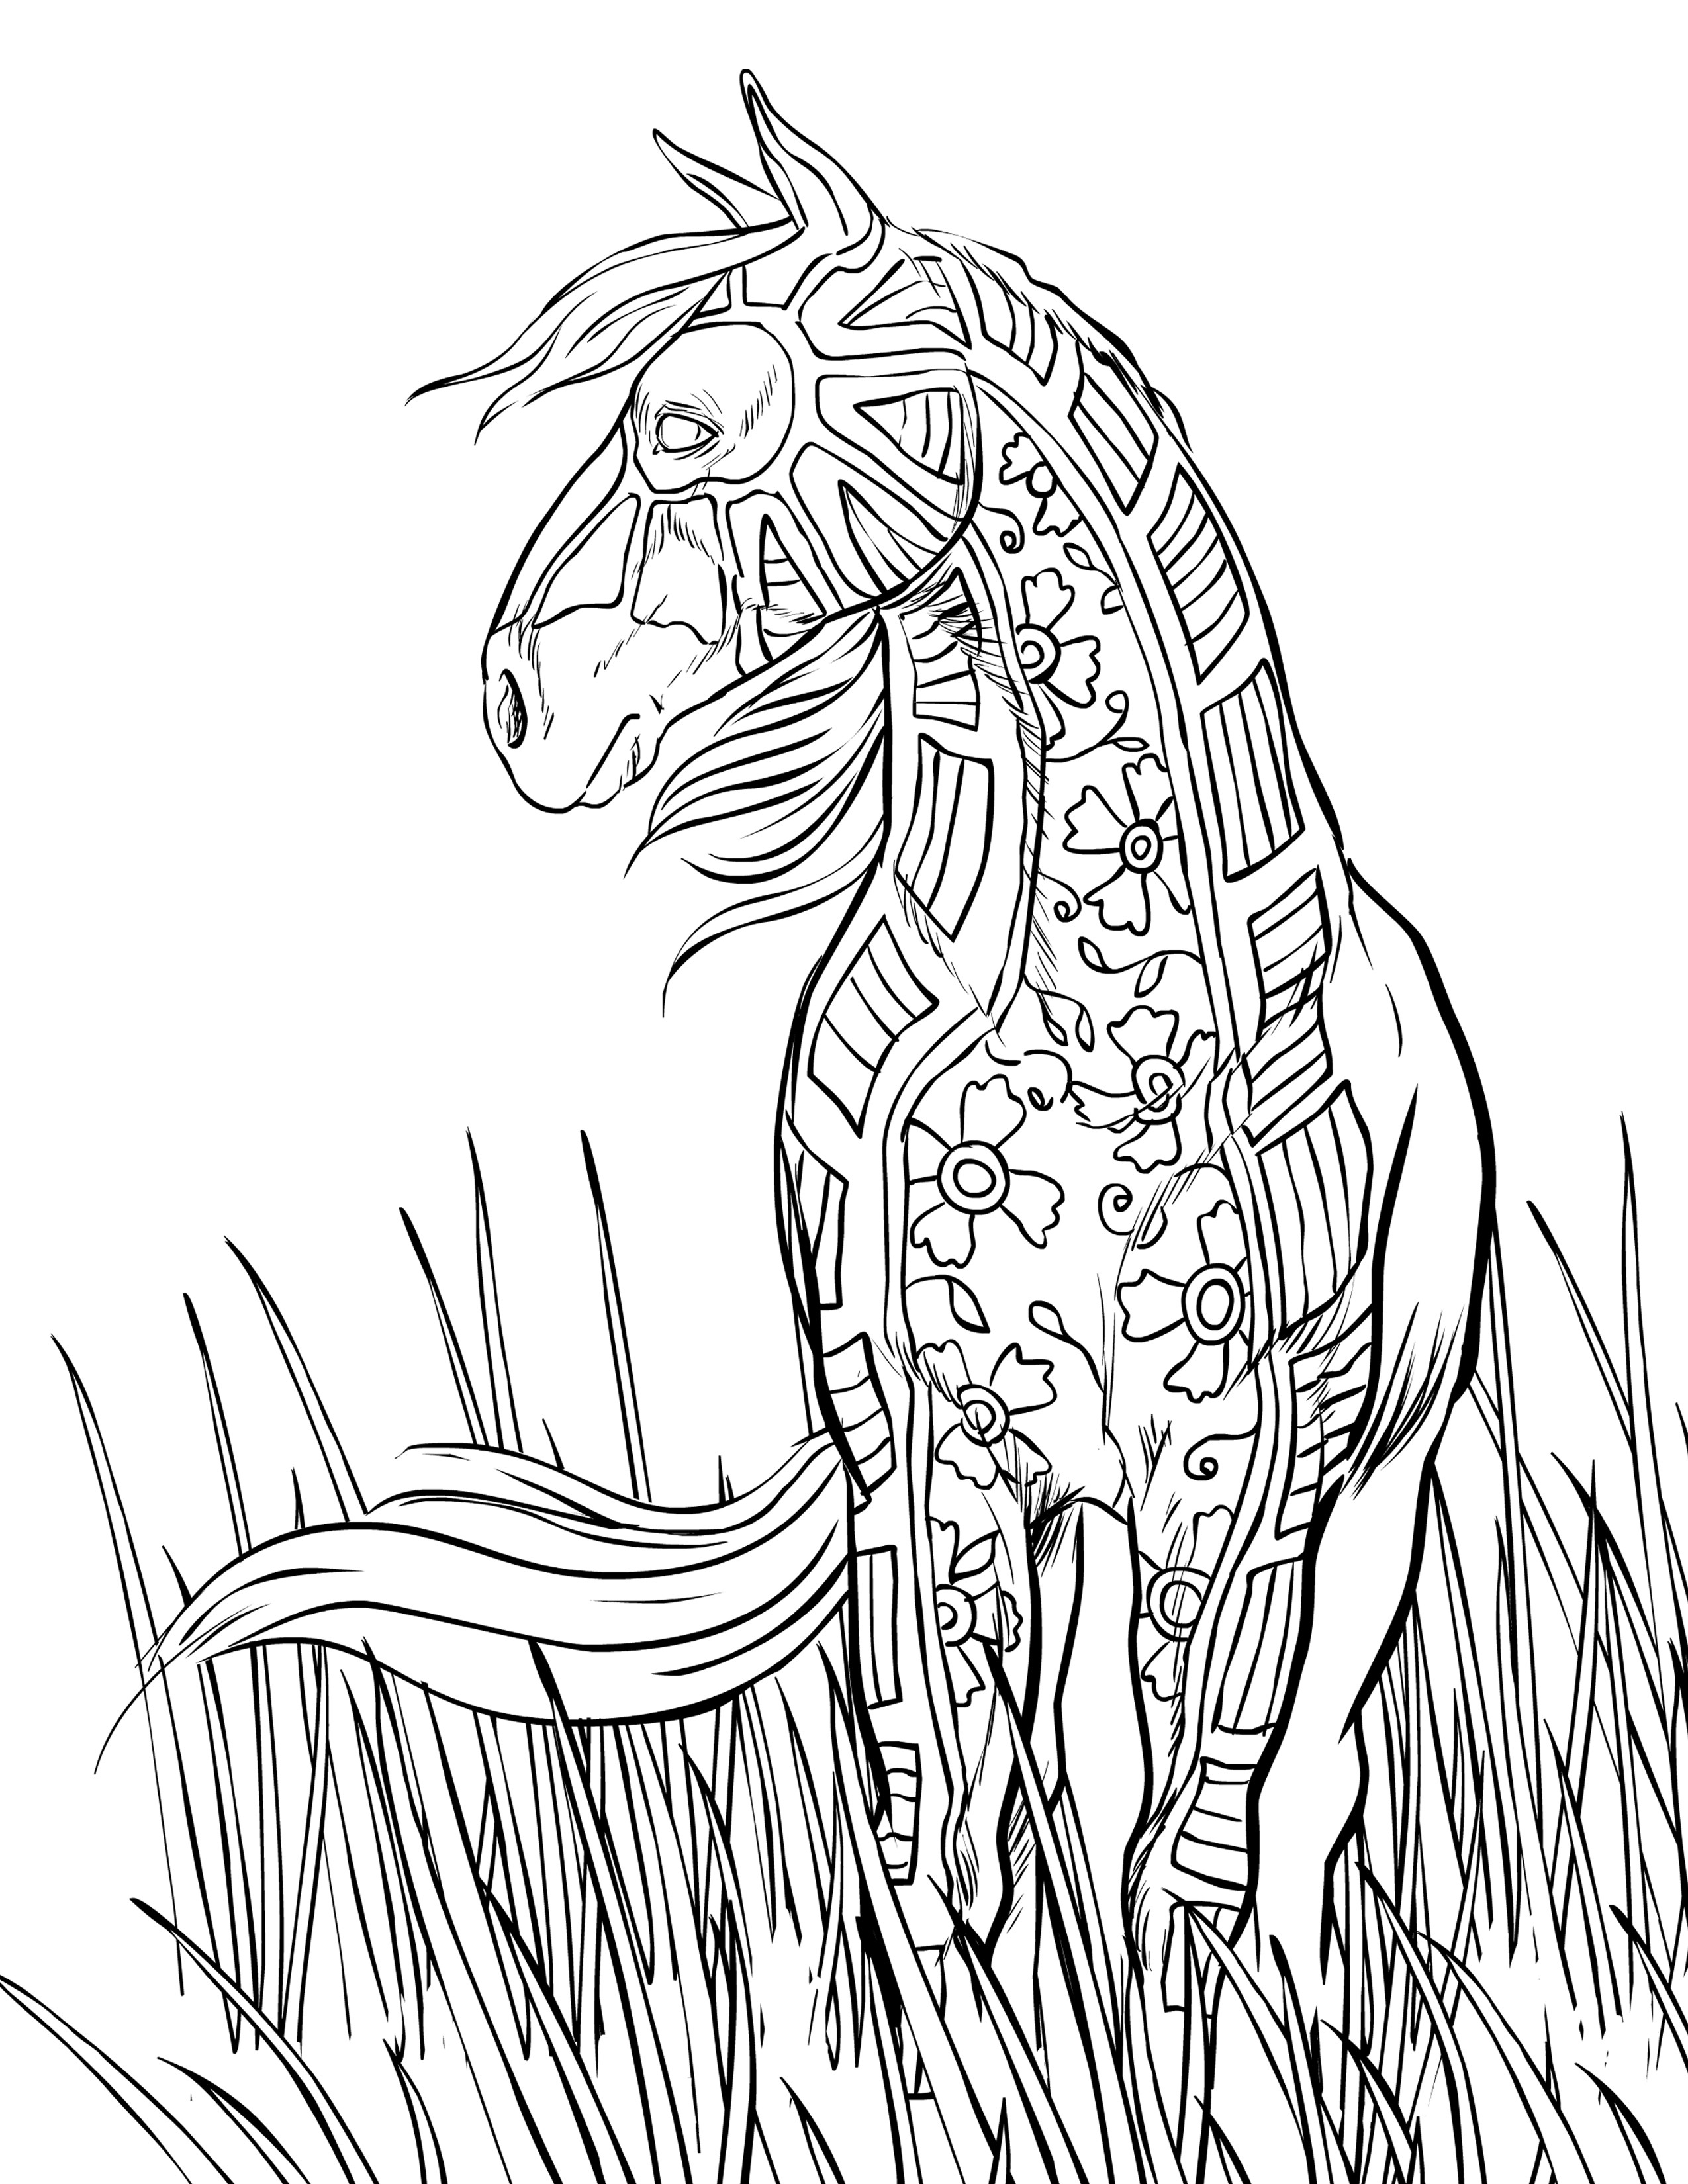 Free Horse Coloring Pages For Adults
 FREE HORSE COLORING PAGES